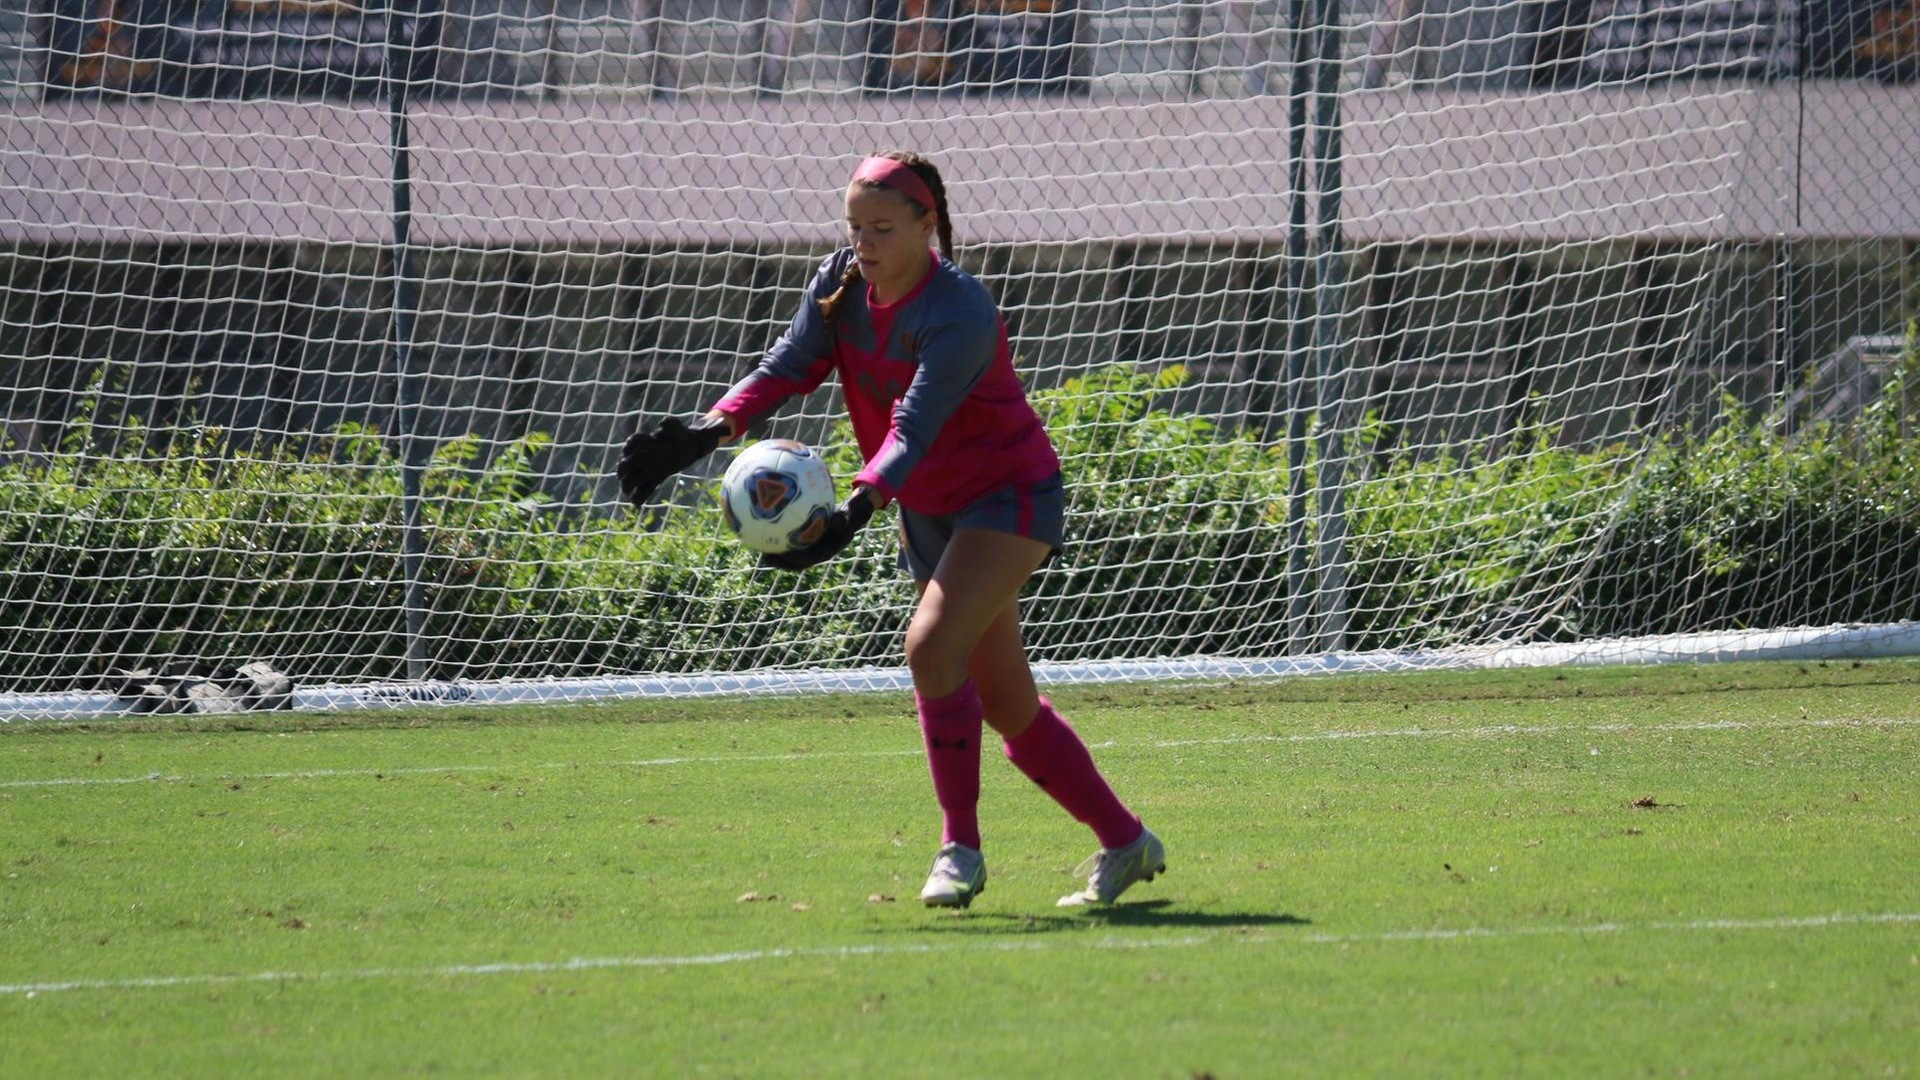 Sadie Brown had 6 saves for her third straight shutout (photo by Stella Cheng)